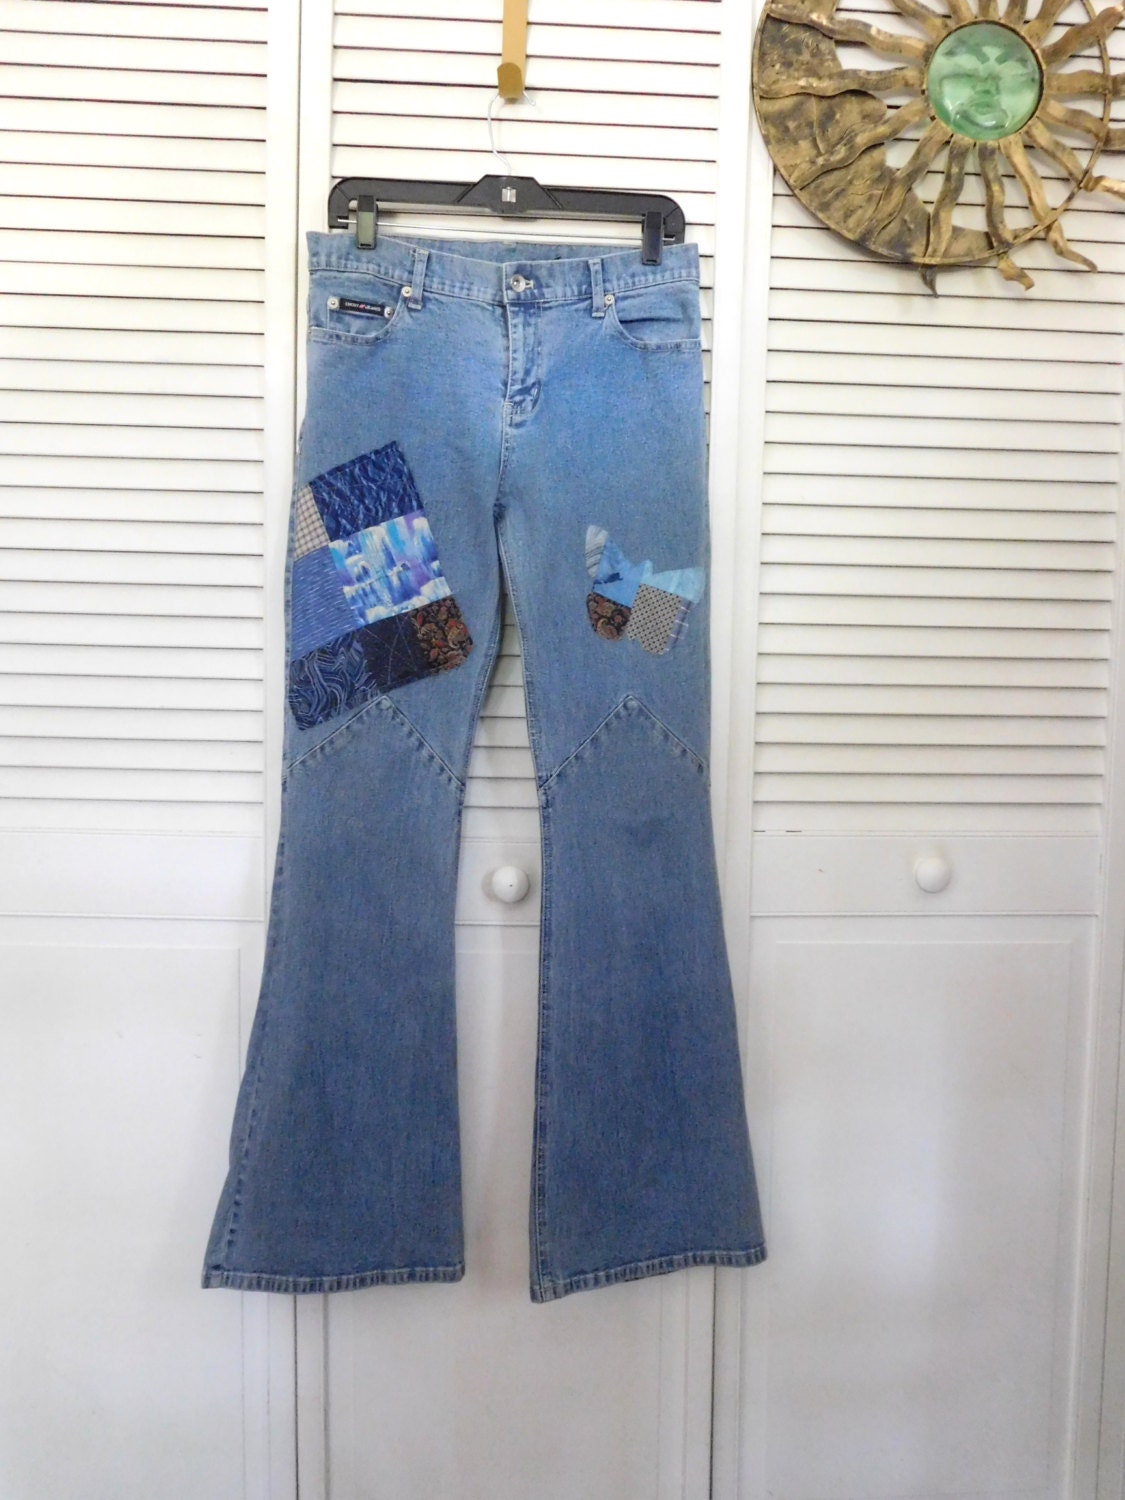 Bohemian Hippie Patch Bell Bottom Jeans Bellbottoms Upcycled